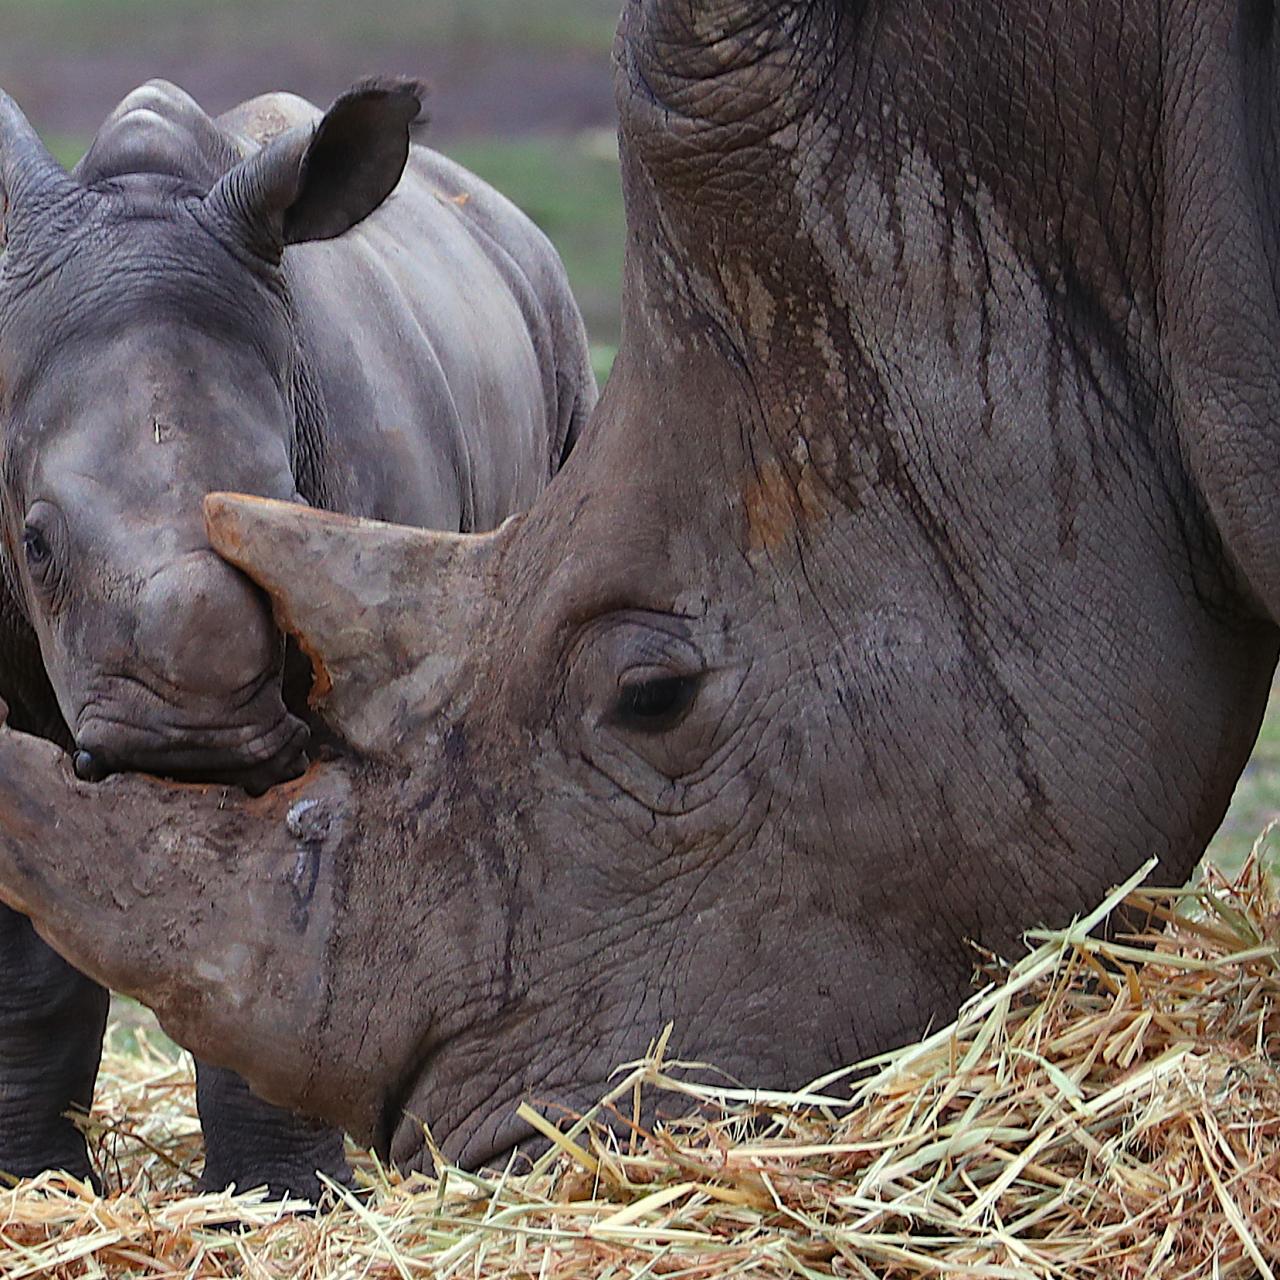 Five Ways You Can Save the Rhinos, Nature and Wildlife